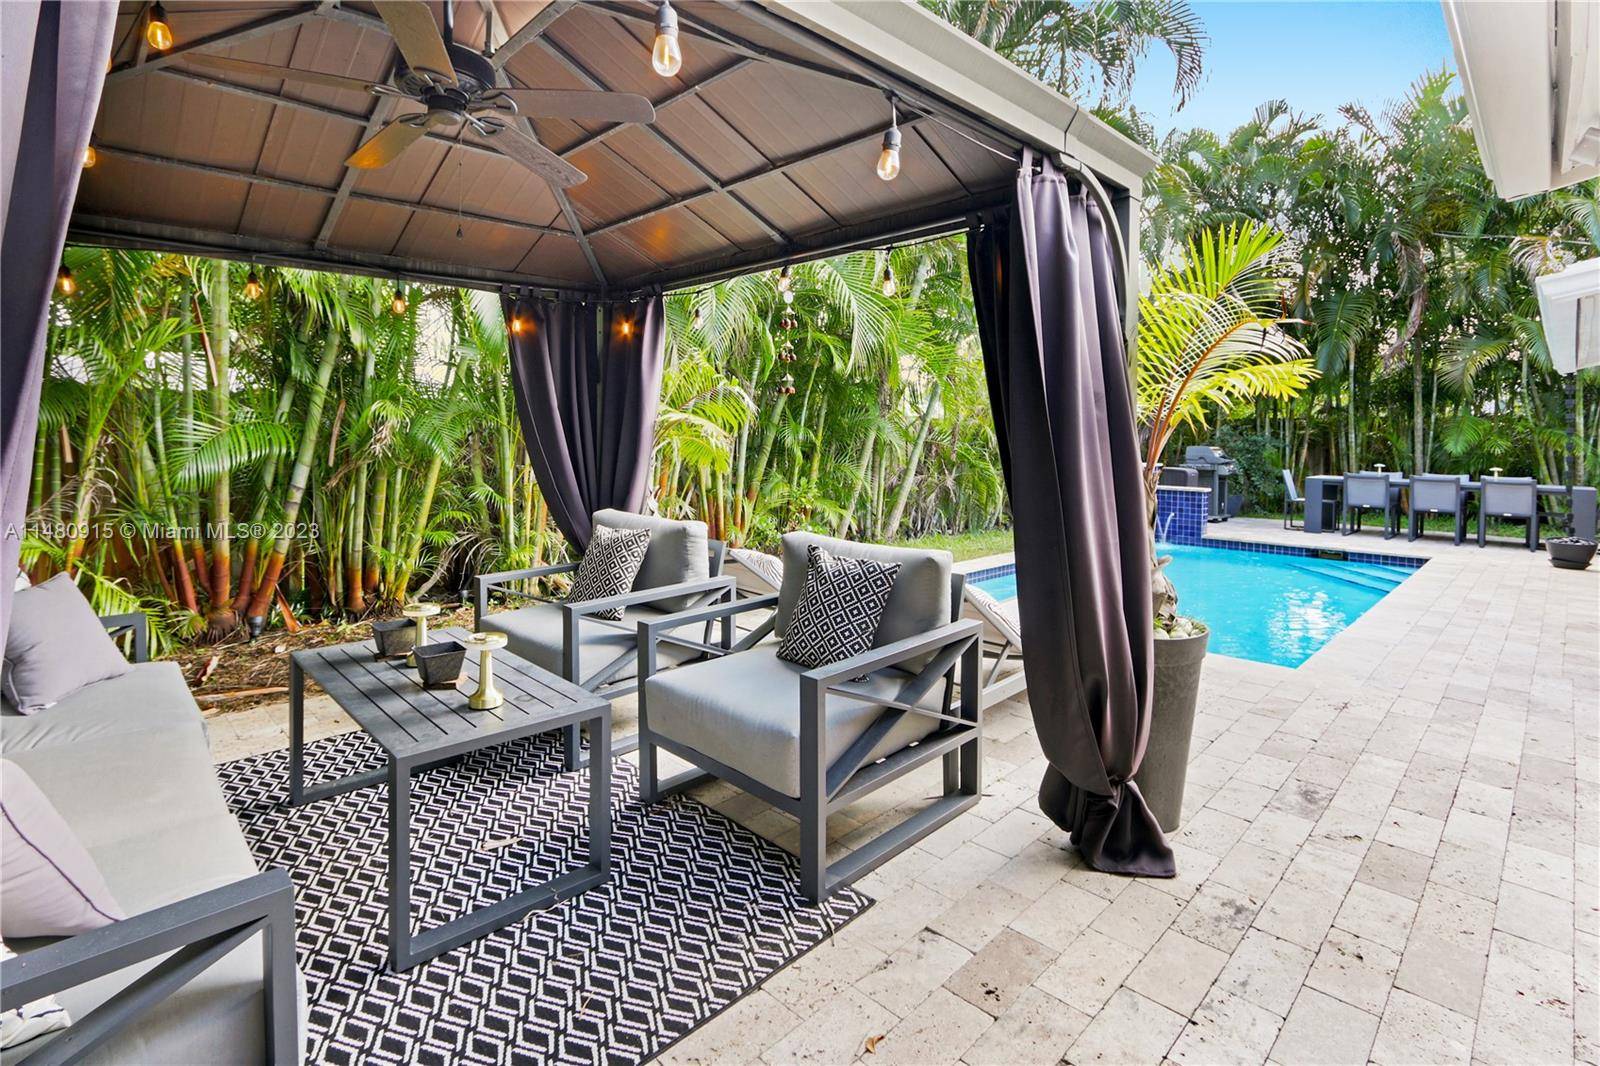 Immaculate 3 2 pool home in desirable Wilton Manors.